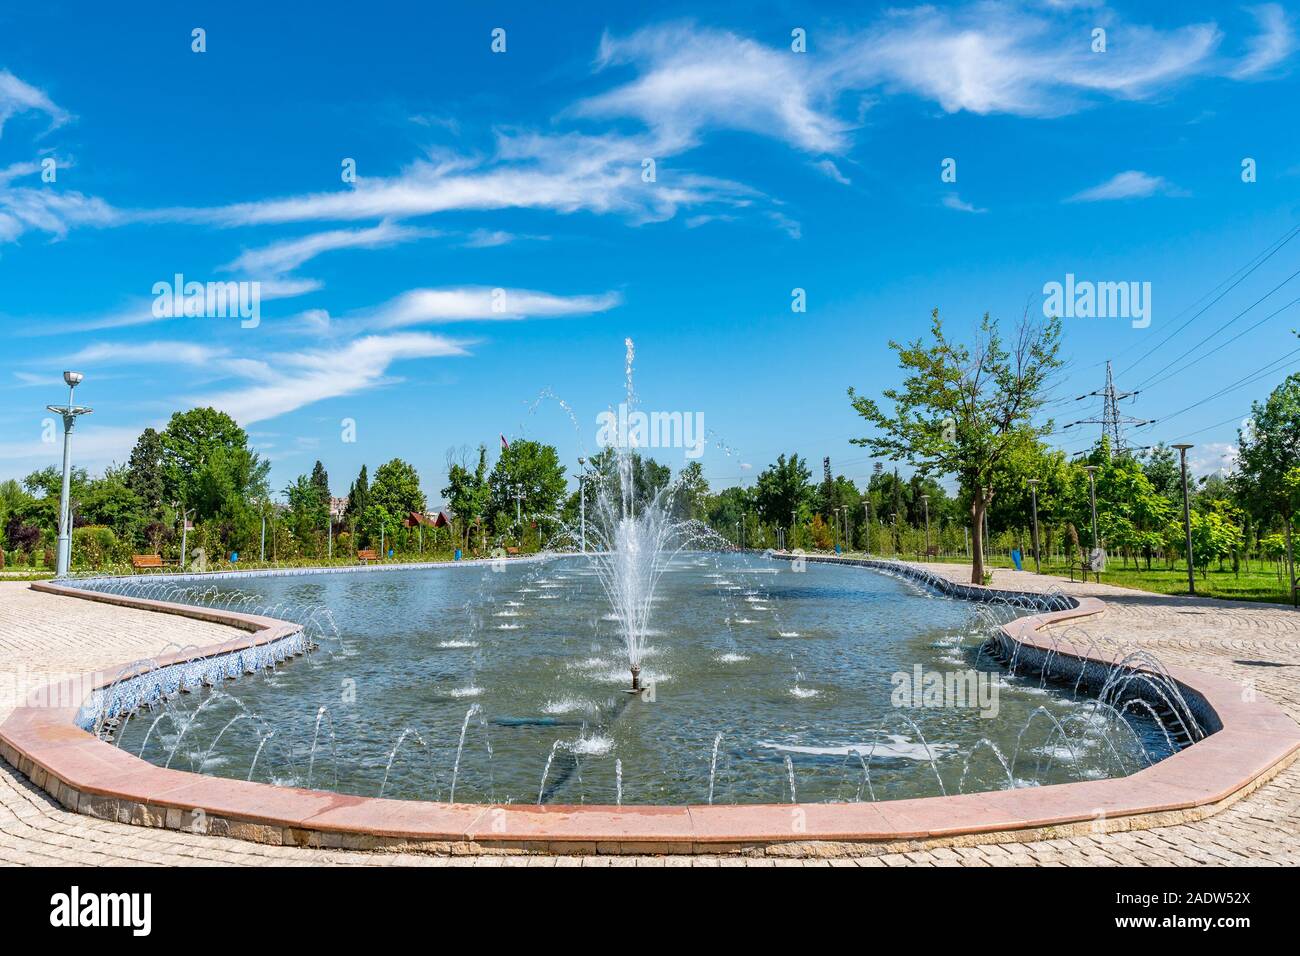 Dushanbe Youth Park Picturesque View of Pond with Fountains on a Sunny Blue Sky Day Stock Photo